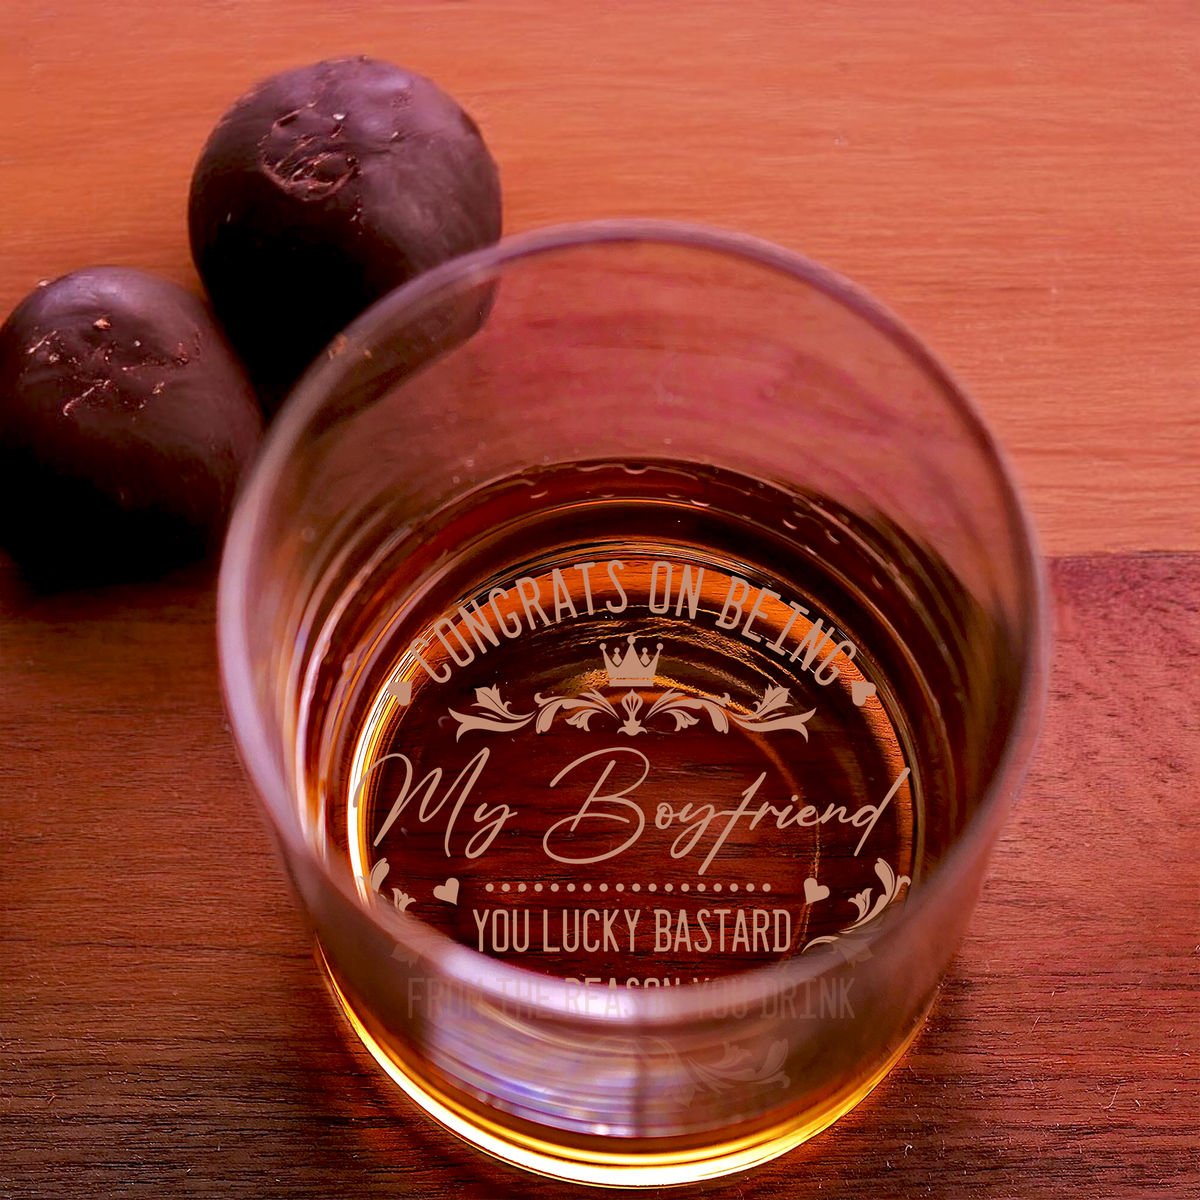 Couple Gifts - Congrats on being my Boyfriend. You lucky bastard from the reason you  drink. - Gifts For Dad, Husband, Boyfriend... - Gifts For Father's Day, Birthday, Anniversary - Personalize Whiskey Glass_5